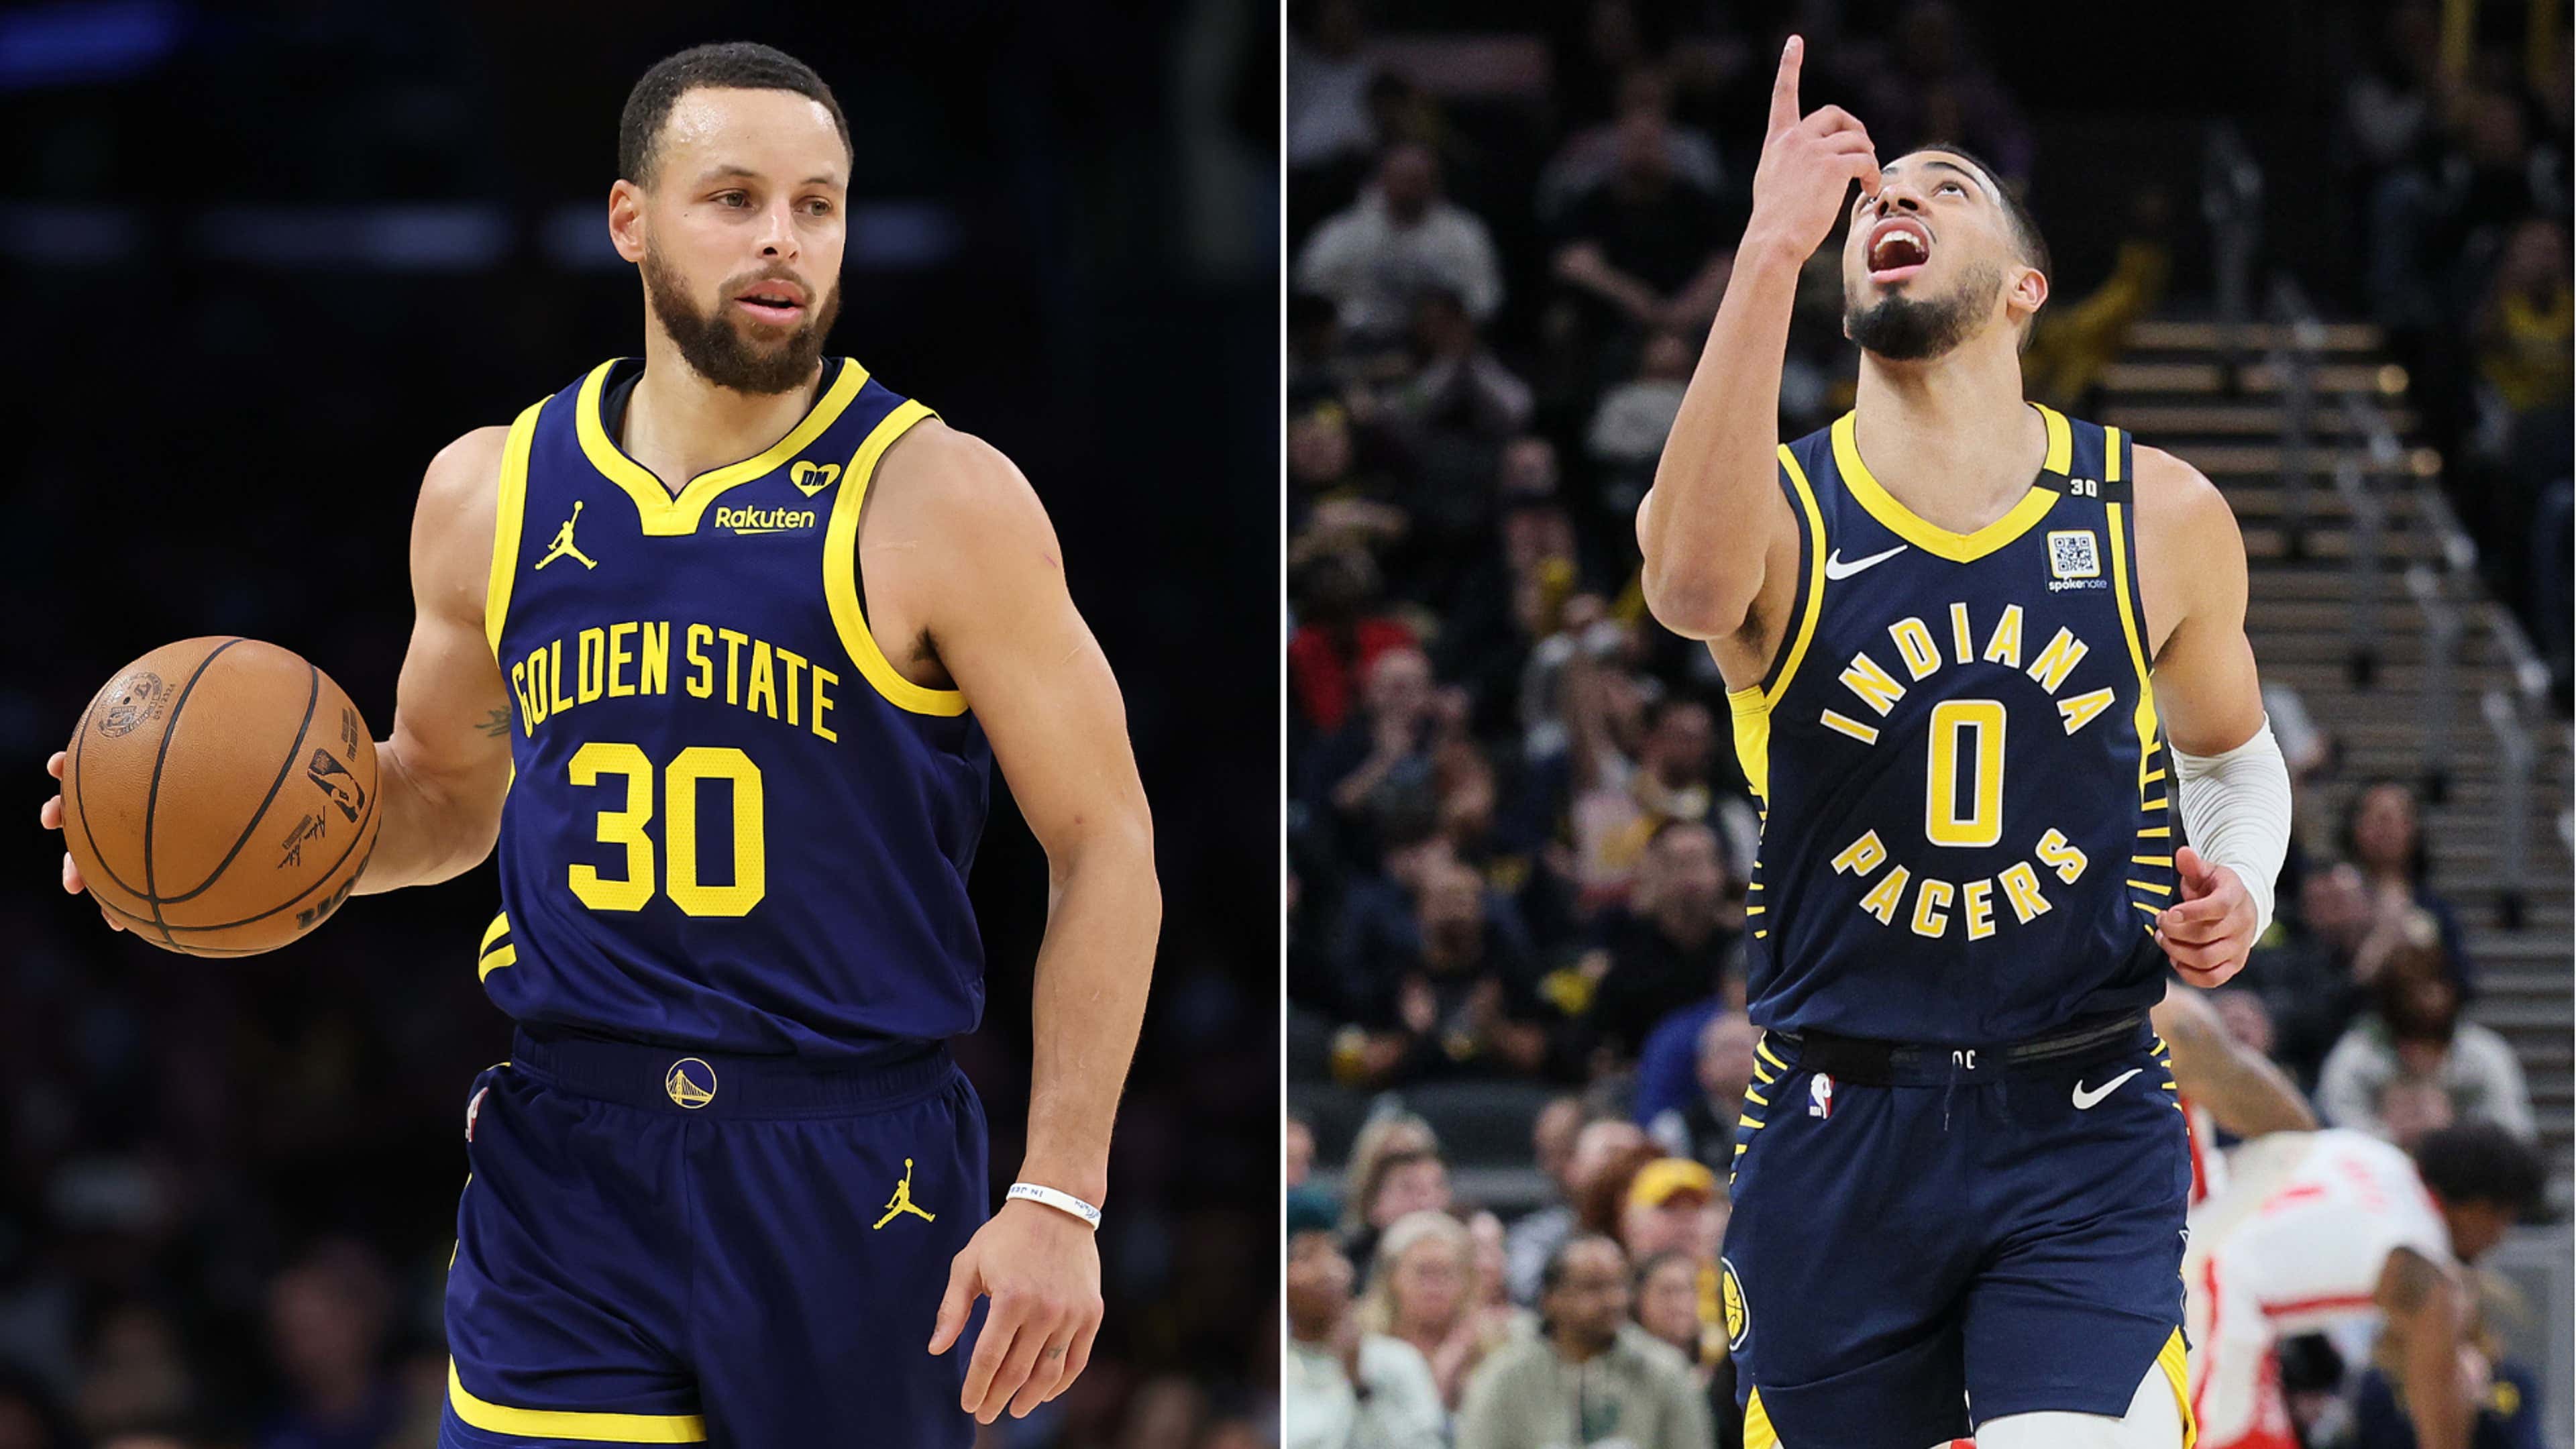 https://assets.goal.com/v3/assets/bltcc7a7ffd2fbf71f5/bltc3956a859ade0a30/65fc072cb83e2b040ad32569/Indiana_Pacers_vs_Golden_State_Warriors_NBA_game.png?auto=webp&format=pjpg&width=3840&quality=60